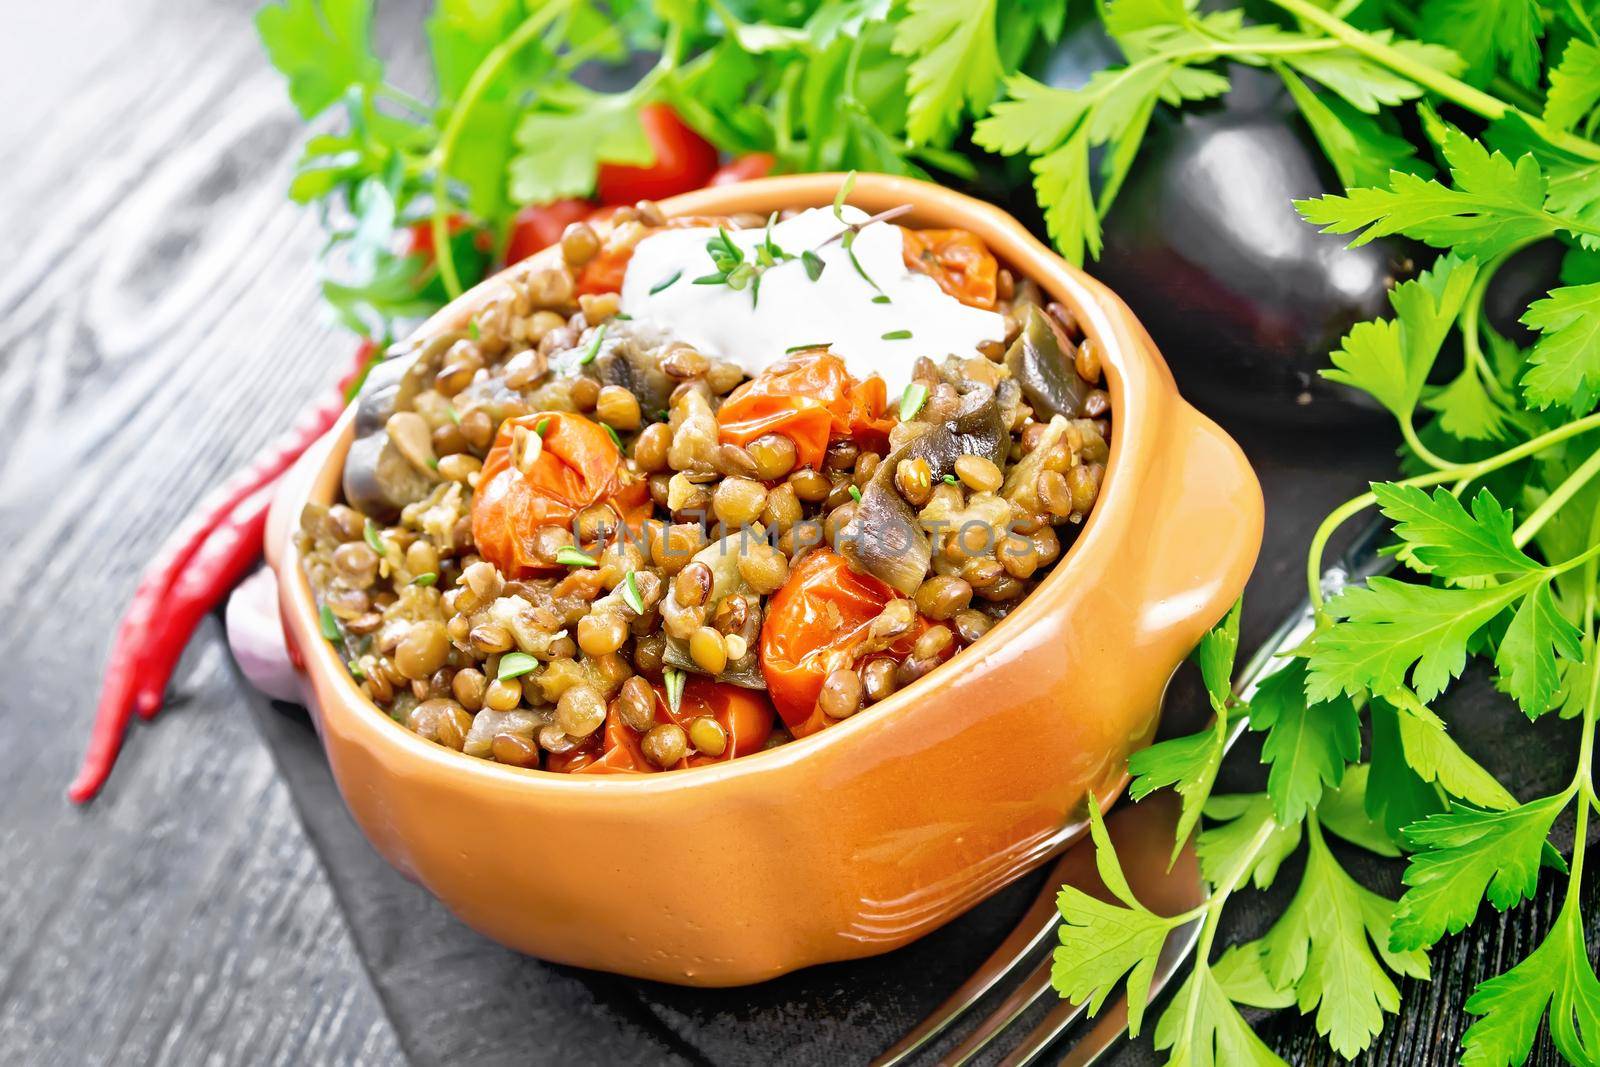 Green lentils stewed with eggplant, tomatoes, garlic and spices, sour cream sauce with a sprig of thyme in a bowl on towel, parsley on dark wooden board